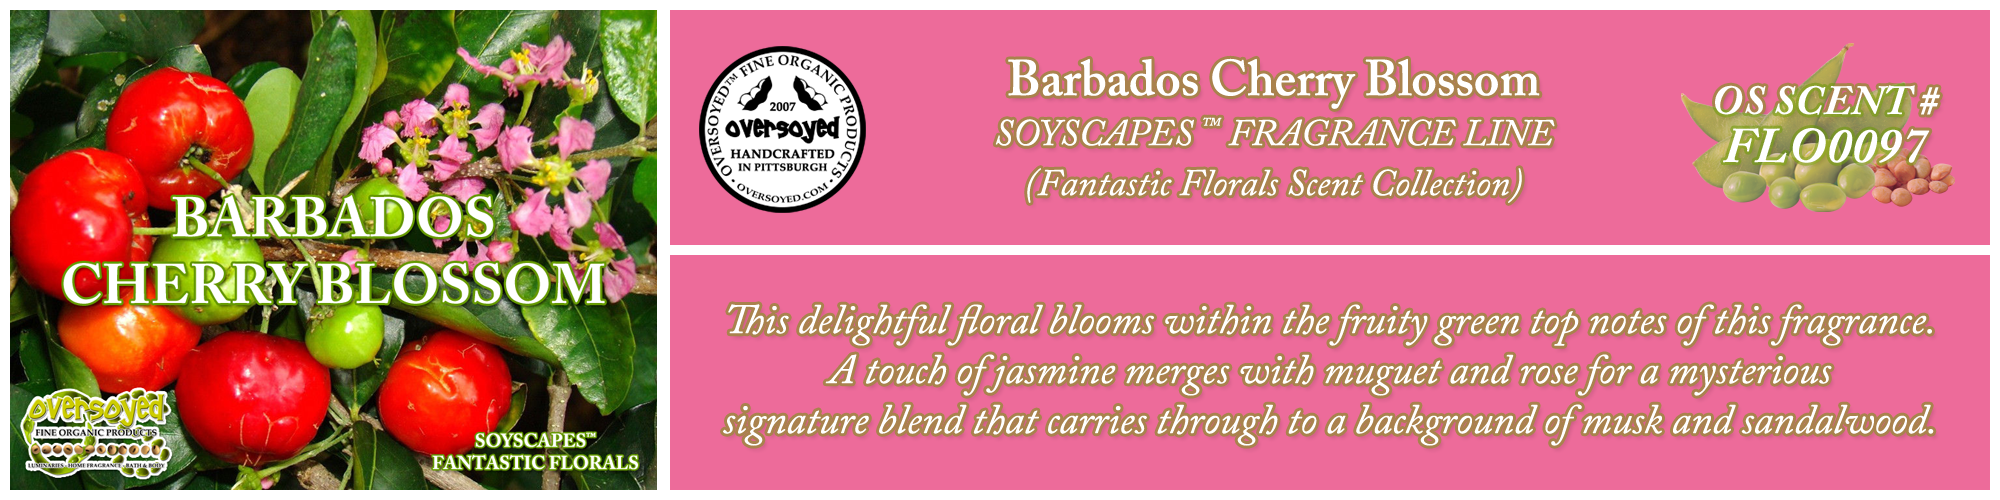 Barbados Cherry Blossom Handcrafted Products Collection